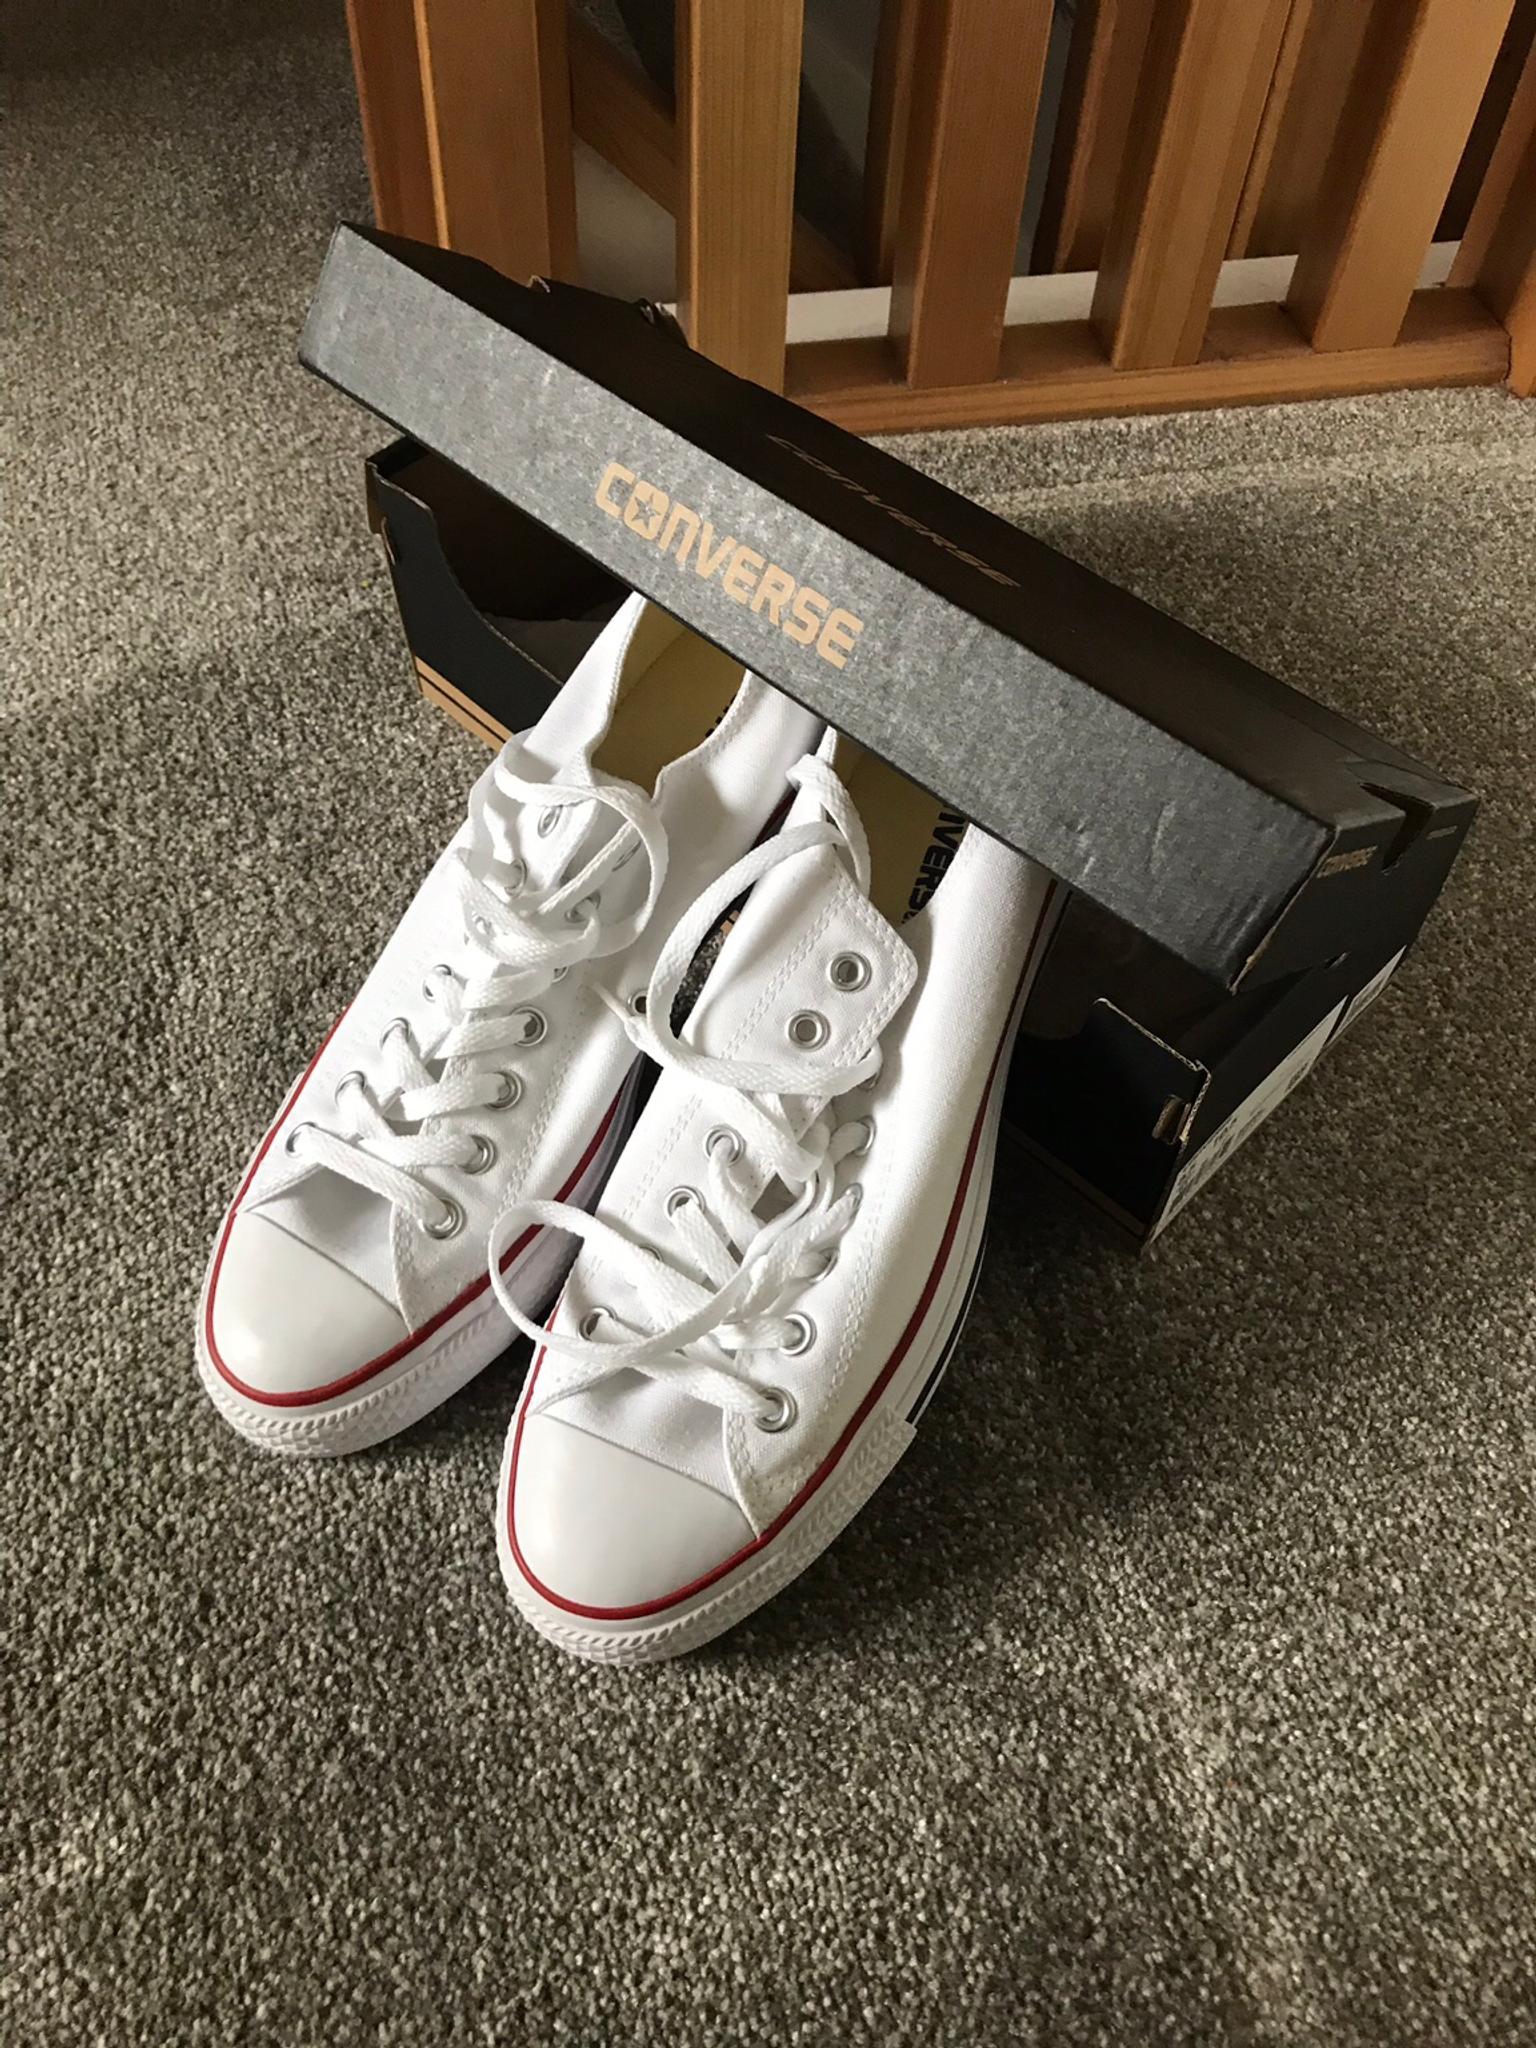 converse 8.5 size, OFF 77%,welcome to buy!